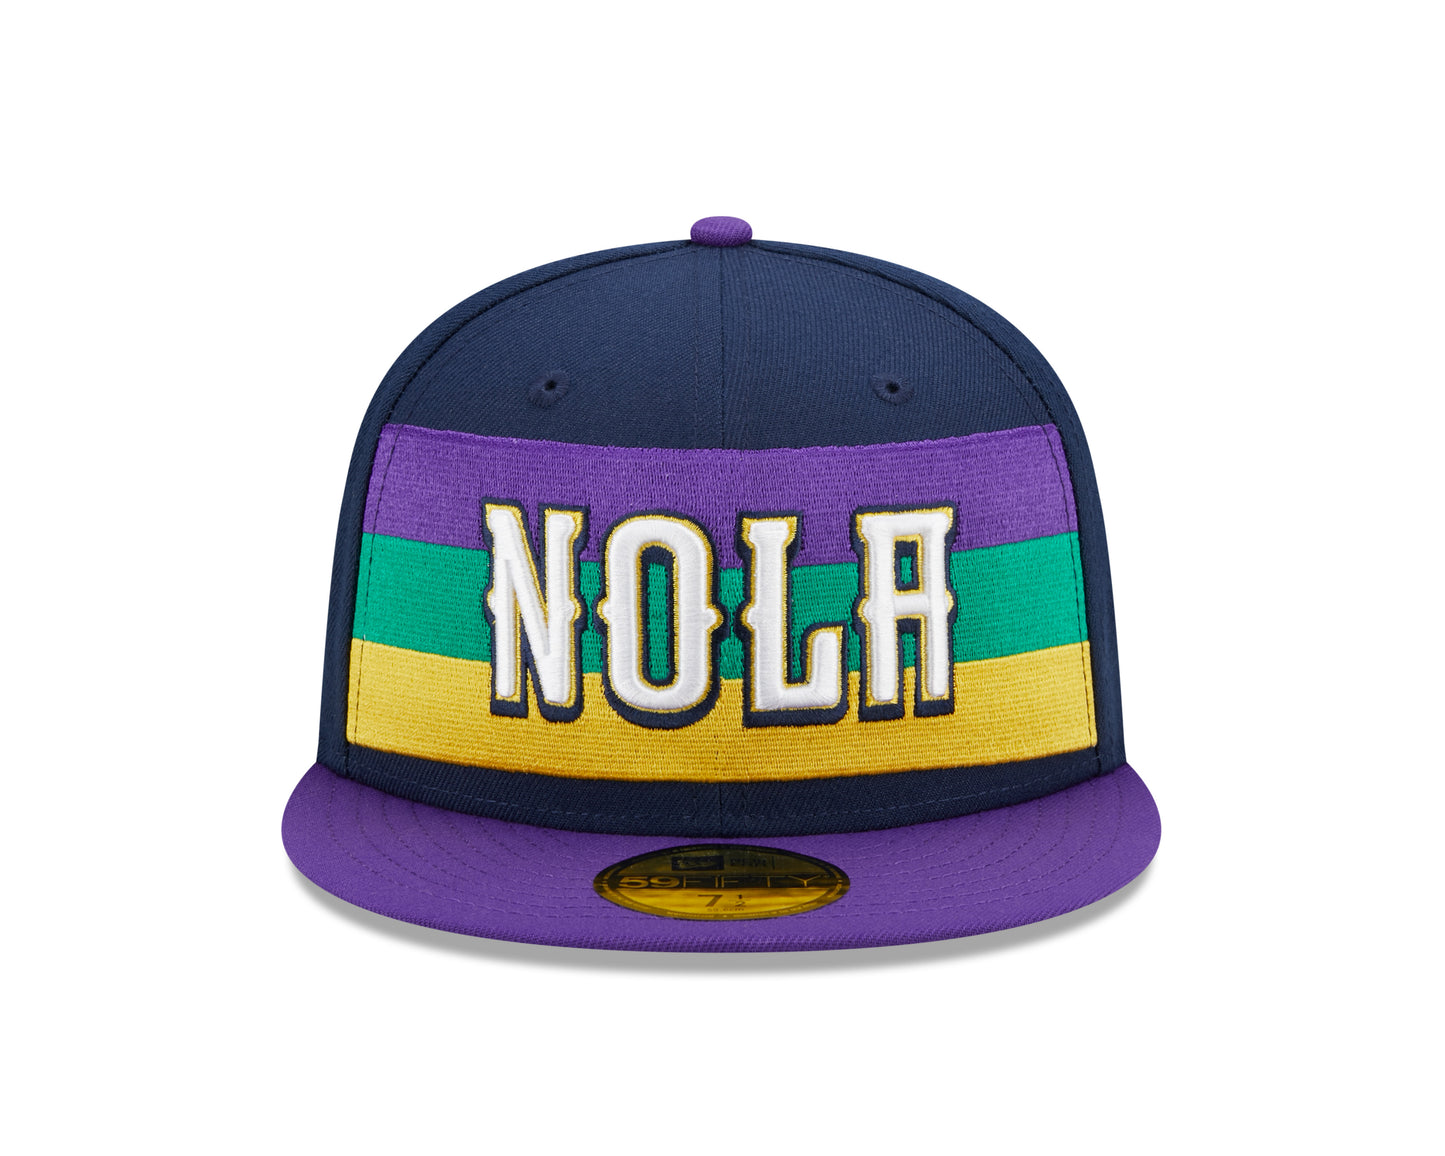 New Orleans Pelicans New Era City Edition 59FIFTY Fitted Hat - Navy